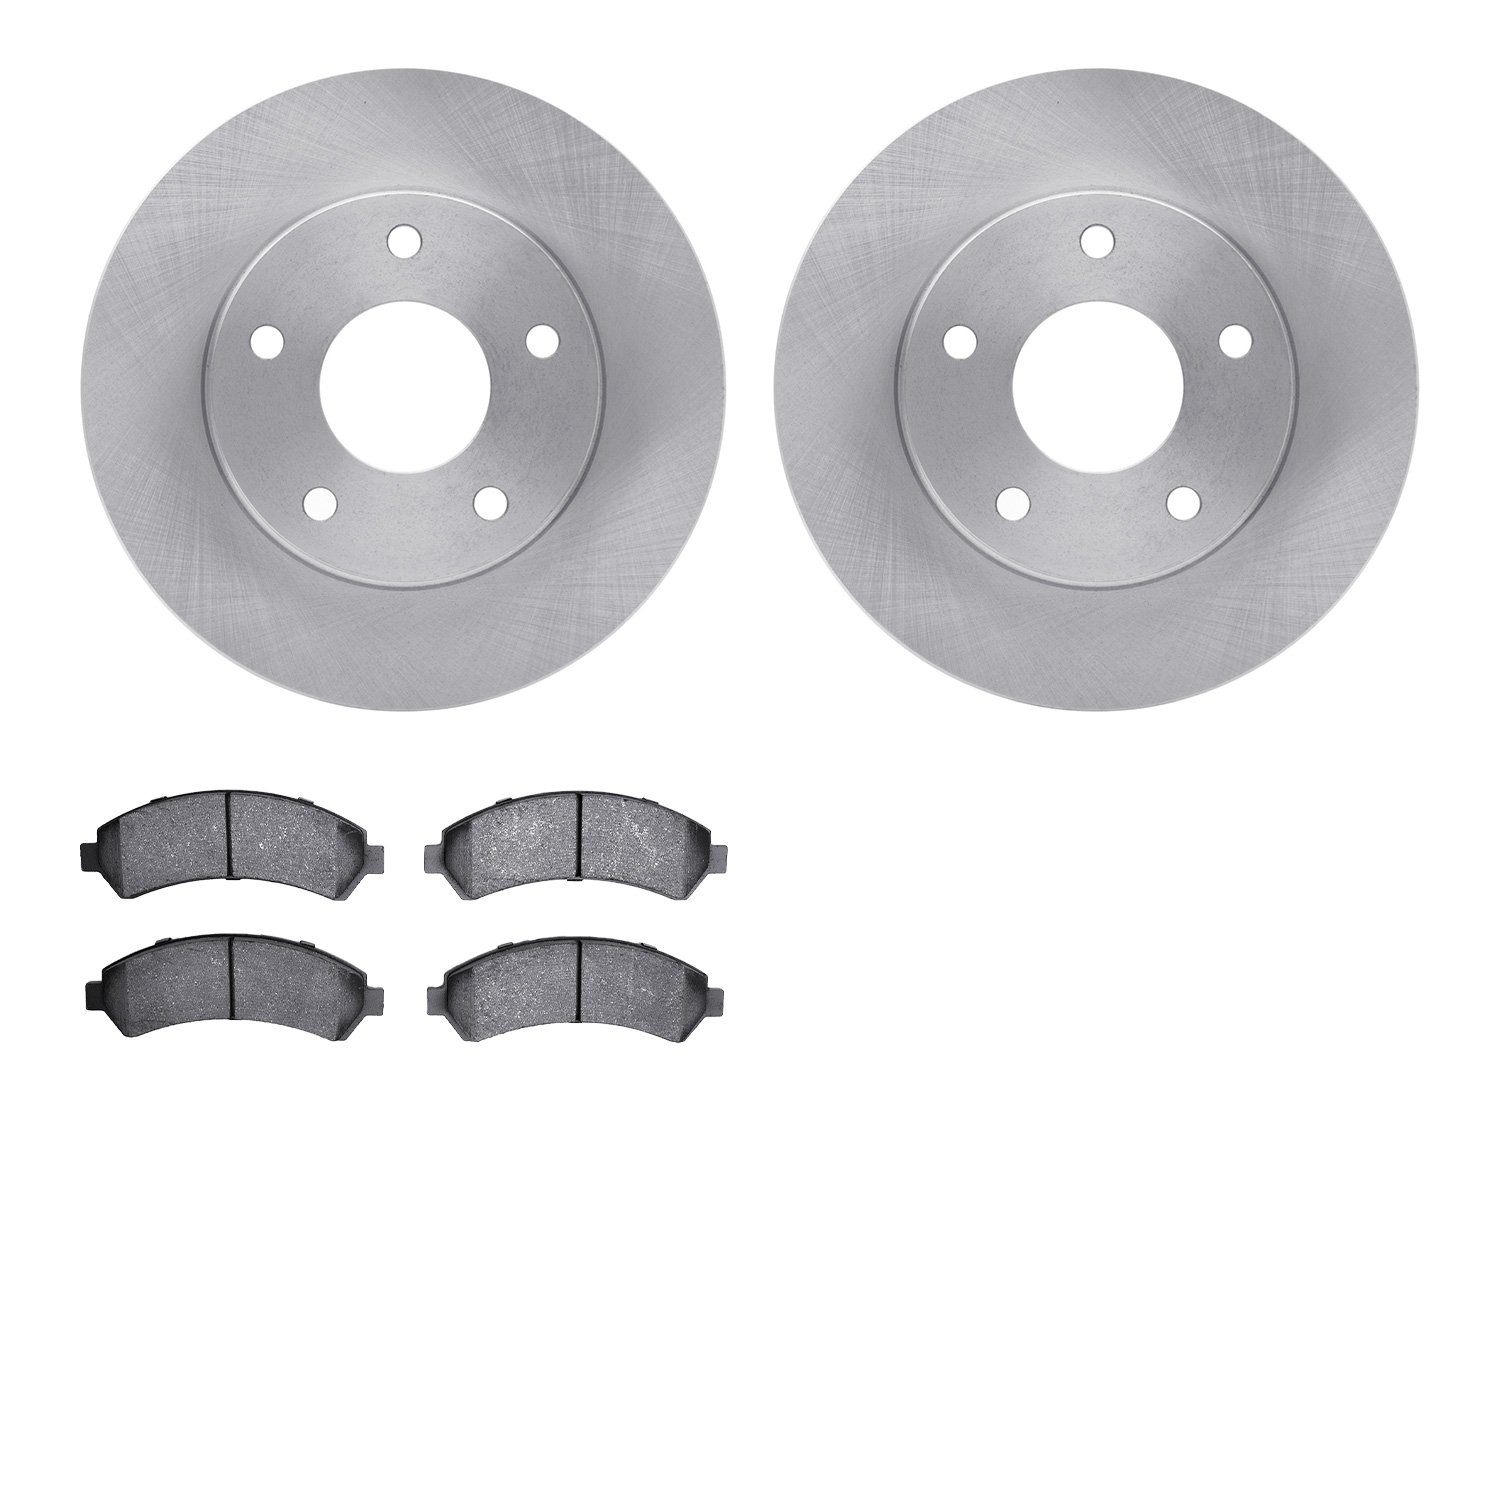 6402-48058 Brake Rotors with Ultimate-Duty Brake Pads, 1997-2005 GM, Position: Front